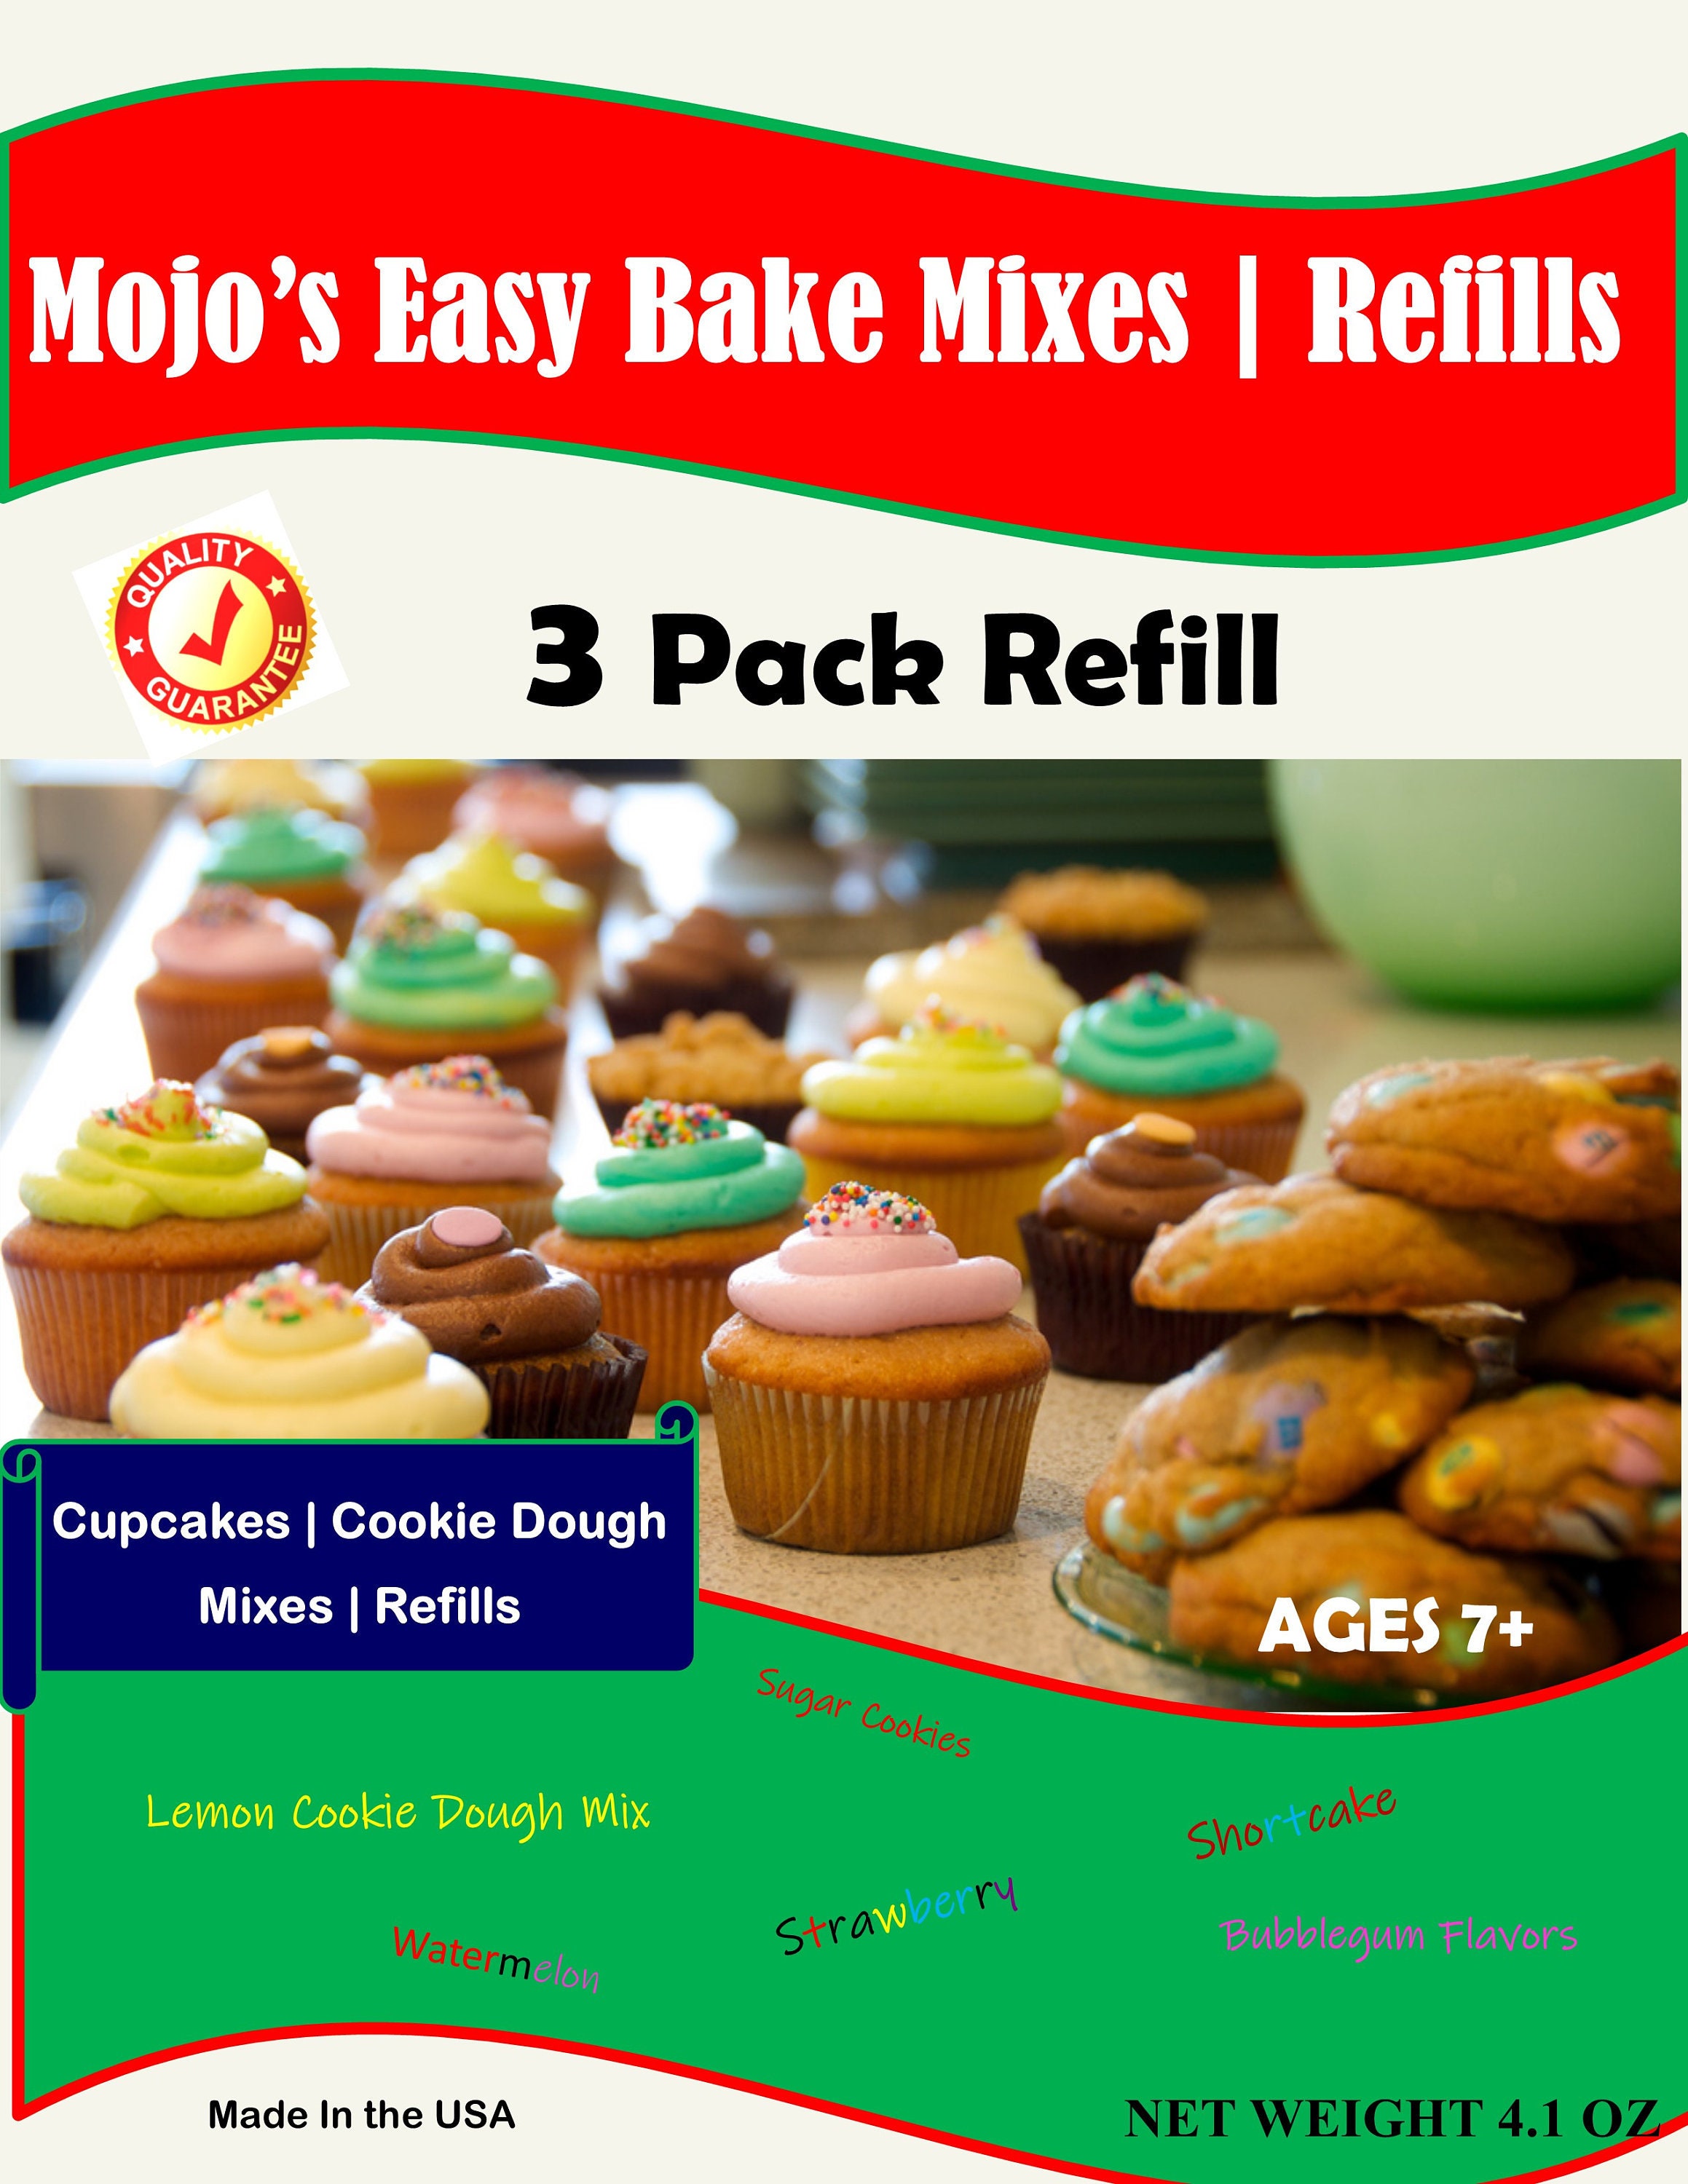 Ultimate EZ 2 Bake Oven Refill Mixes 3 Pack Bundle Cake & Cookie 